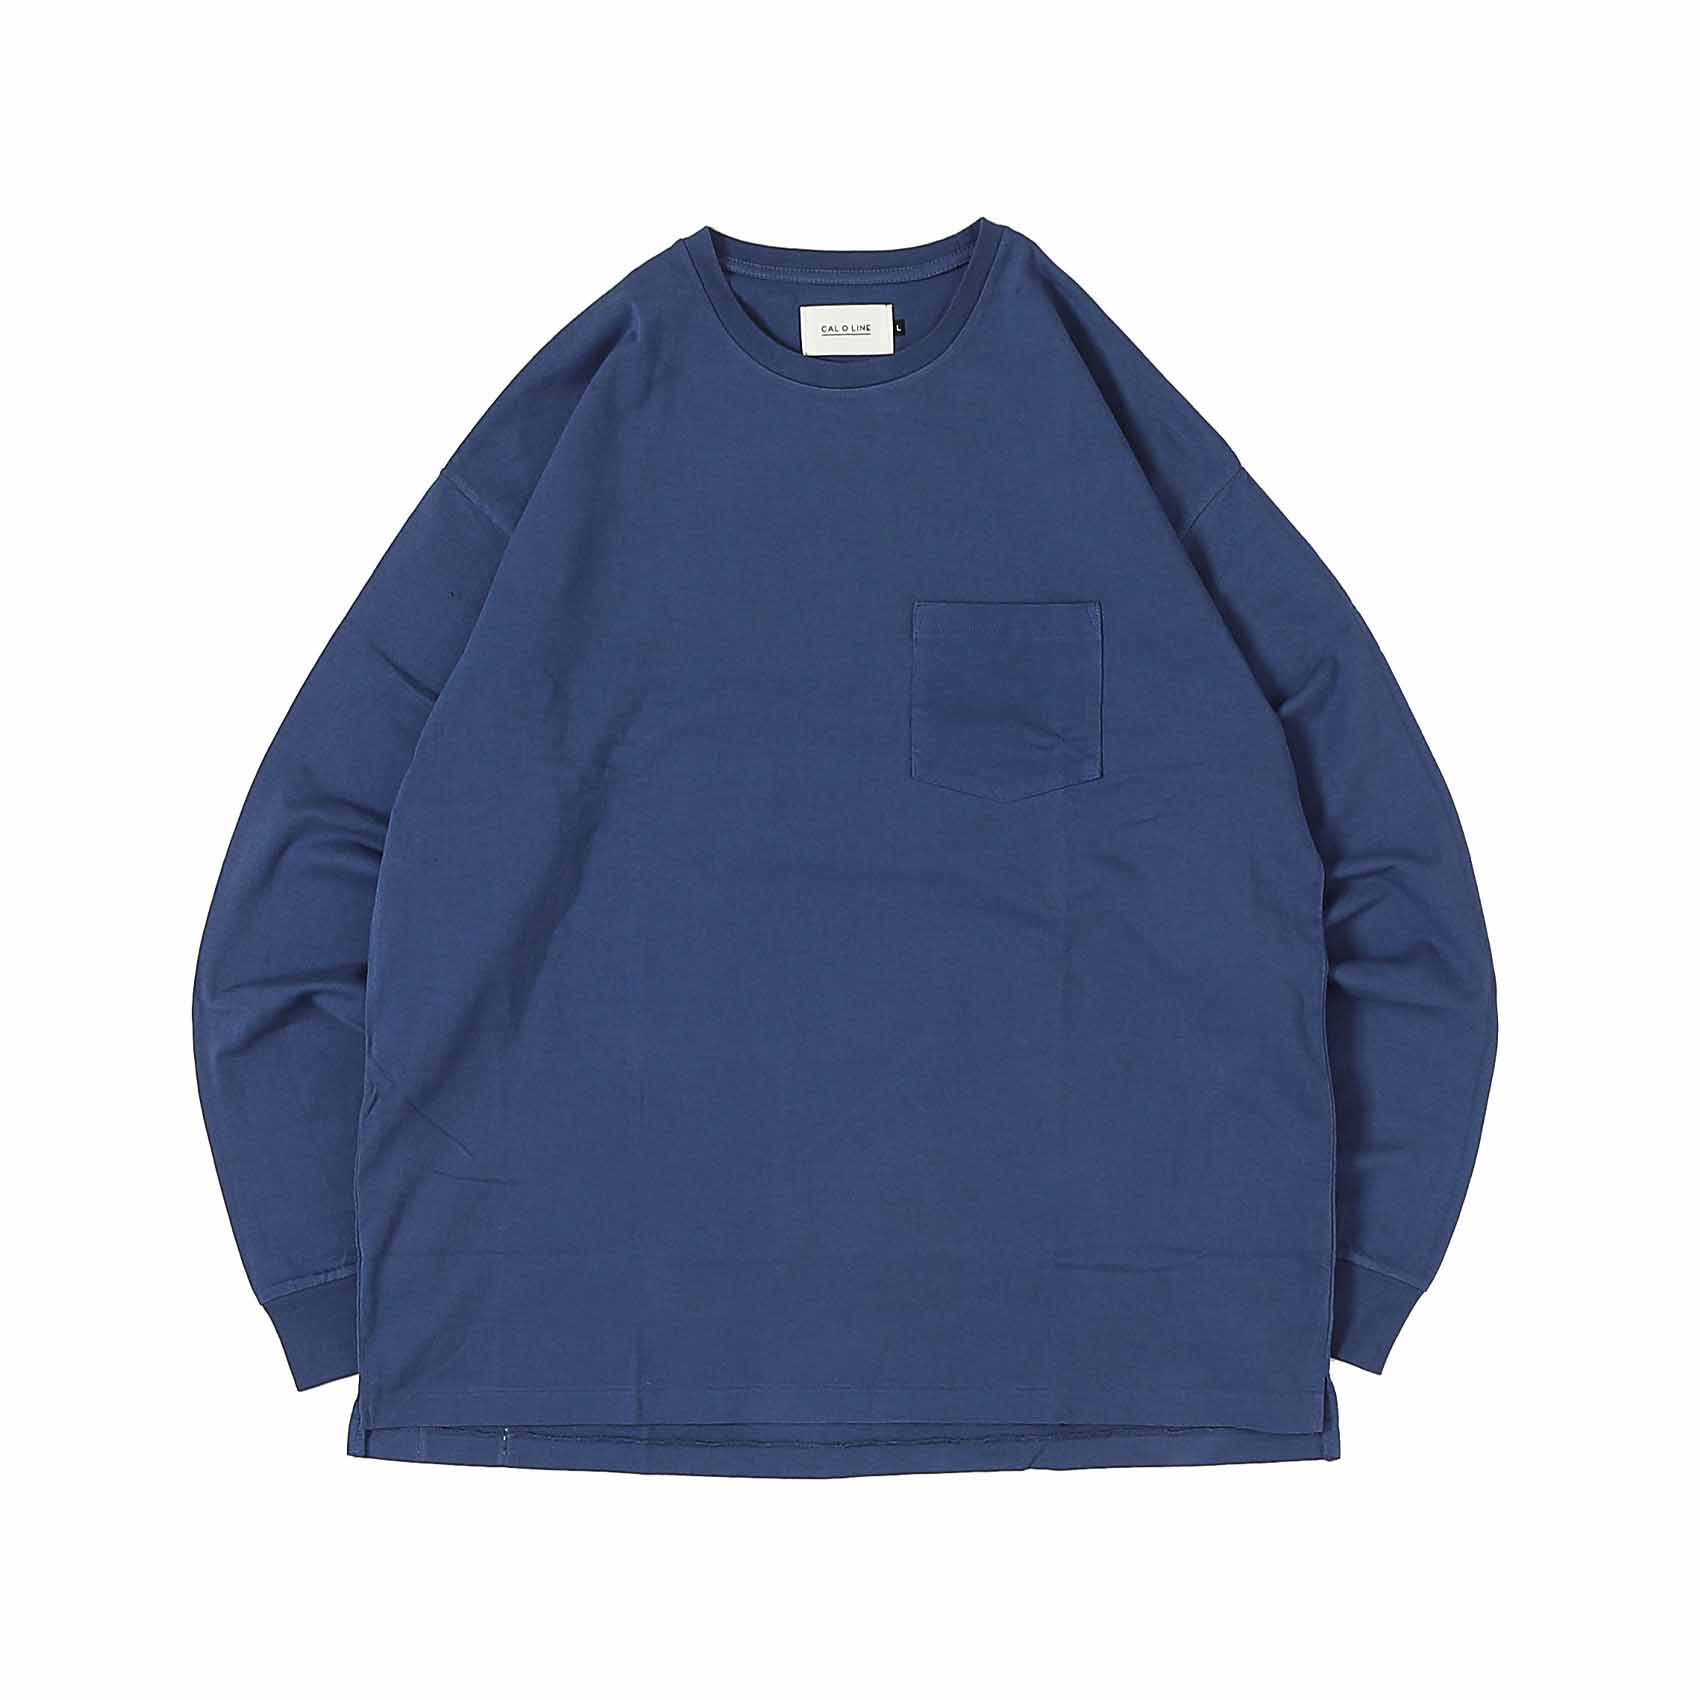 SOLID COLOR L/S TEE - NAVY BLUE